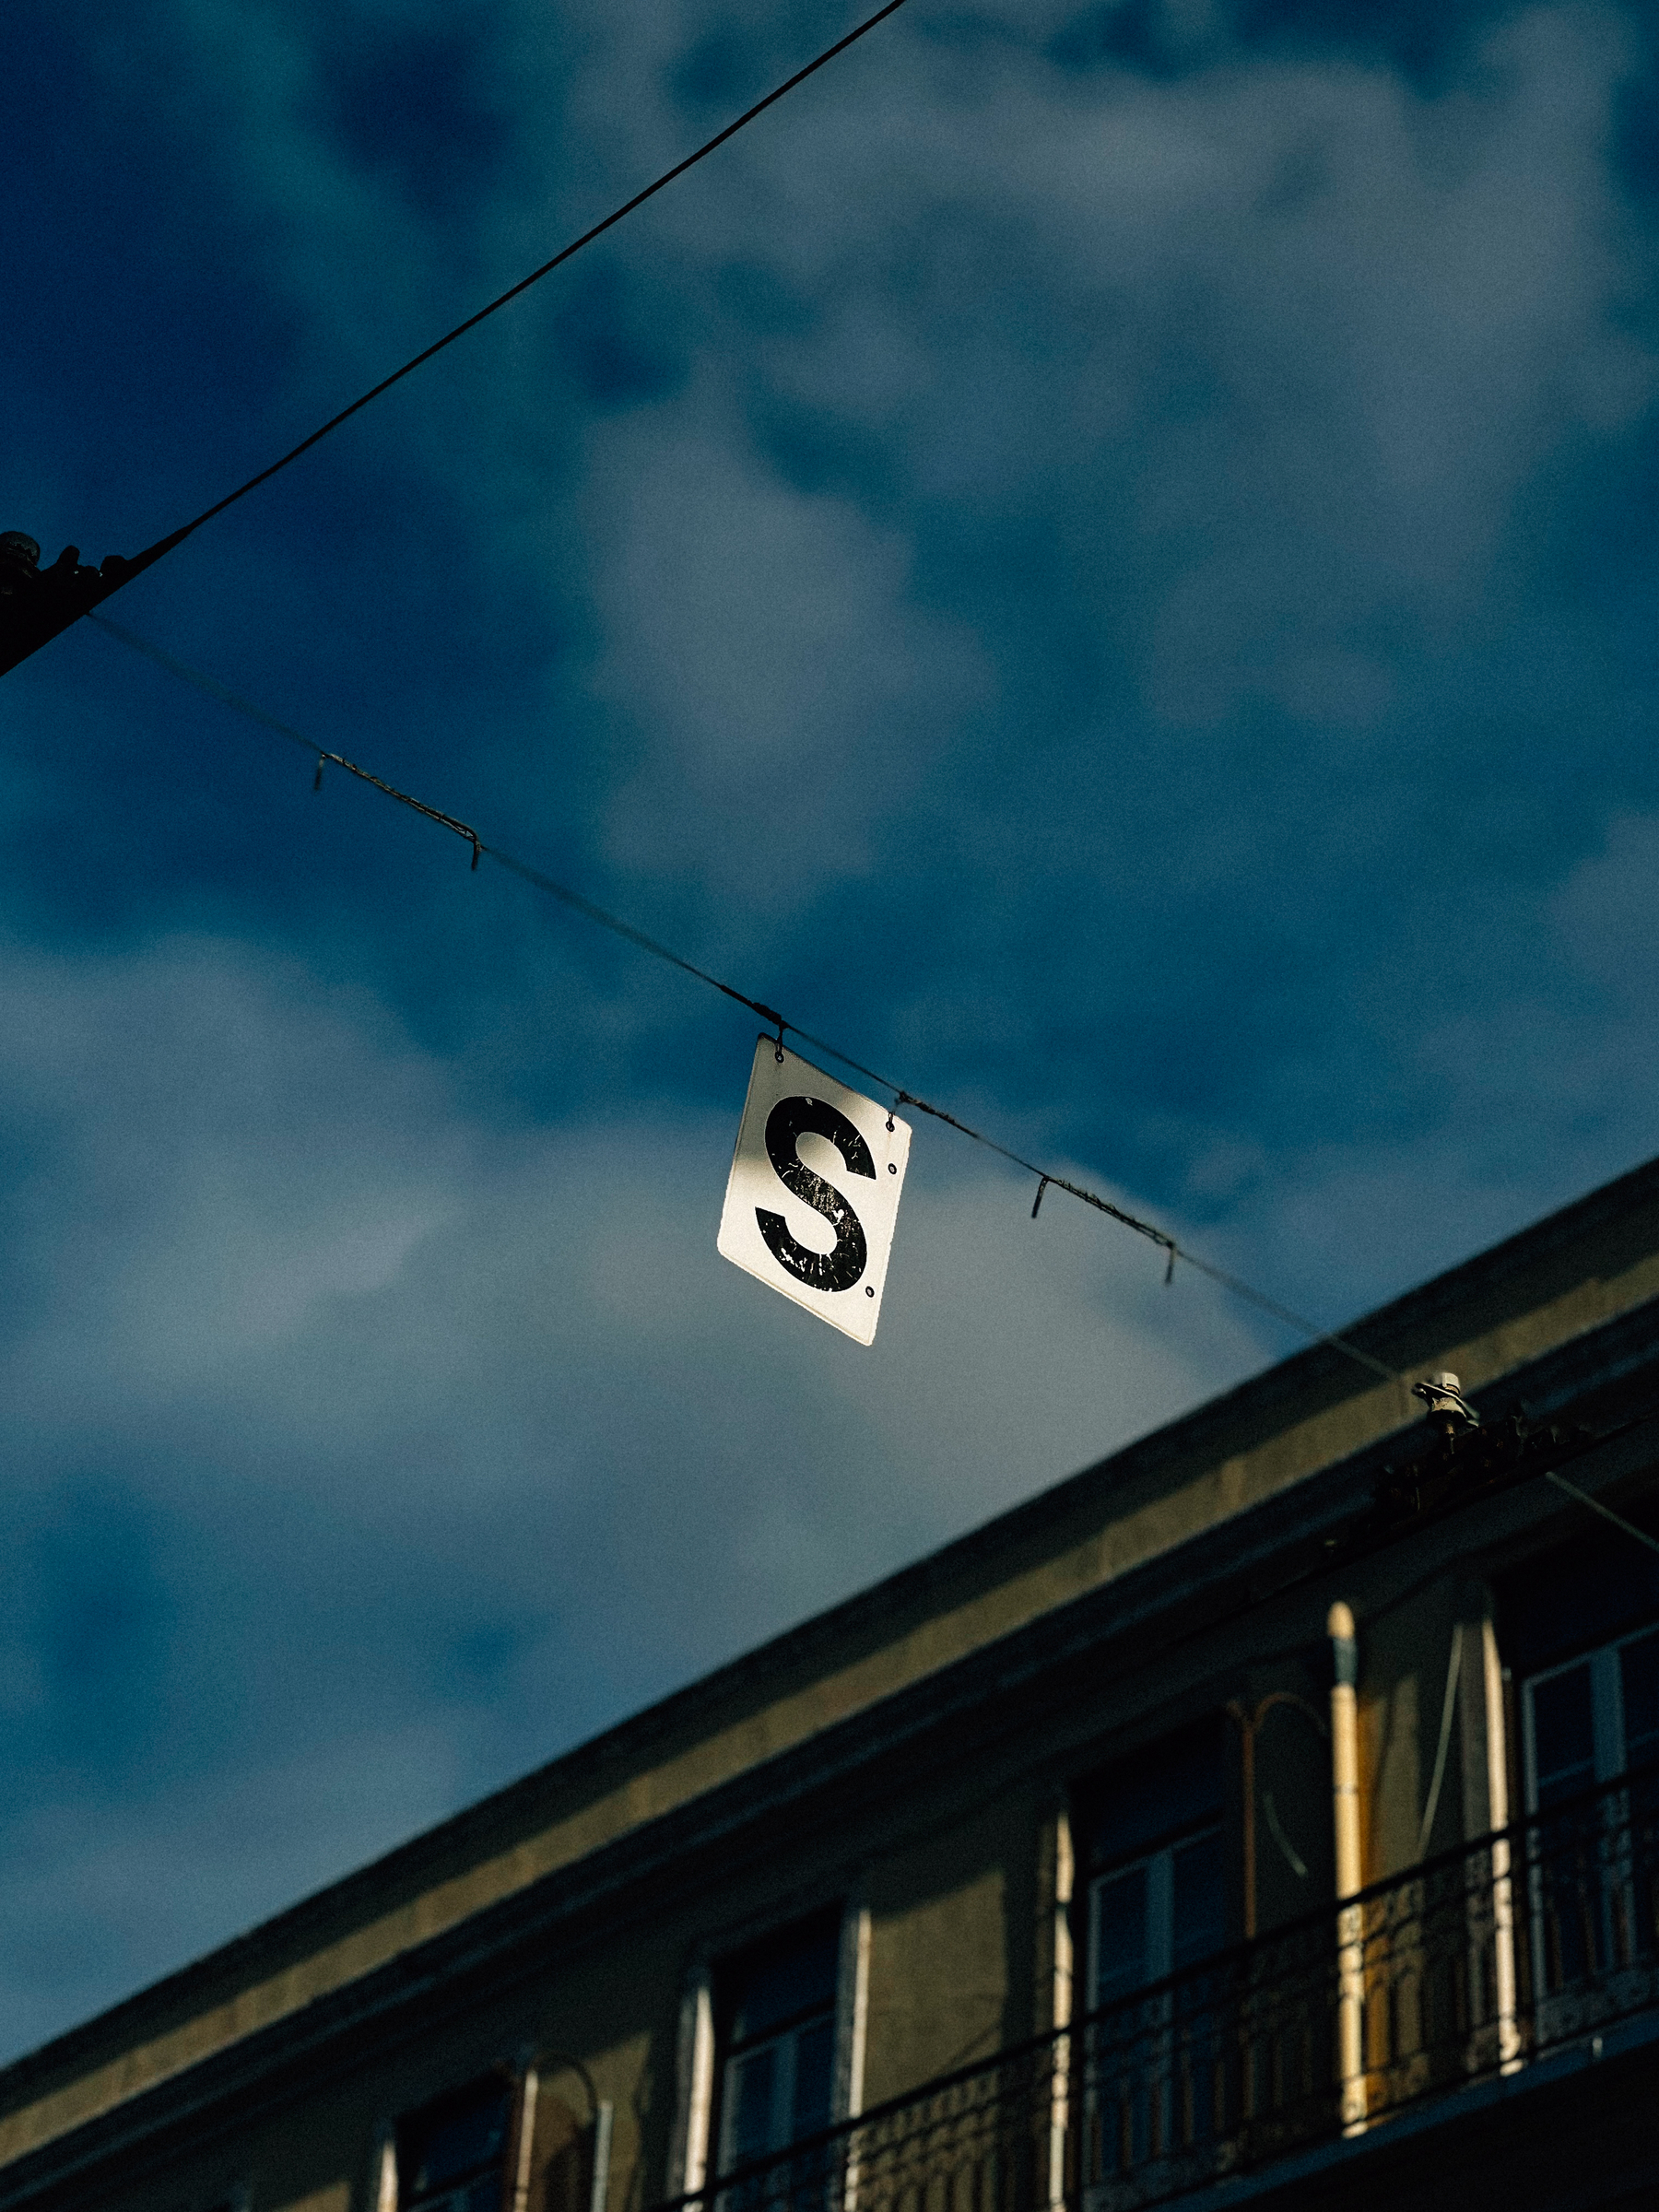 A sign with the letter &lsquo;S&rsquo; hanging from a wire against a backdrop of a blue sky and the upper facade of a building with balconies.